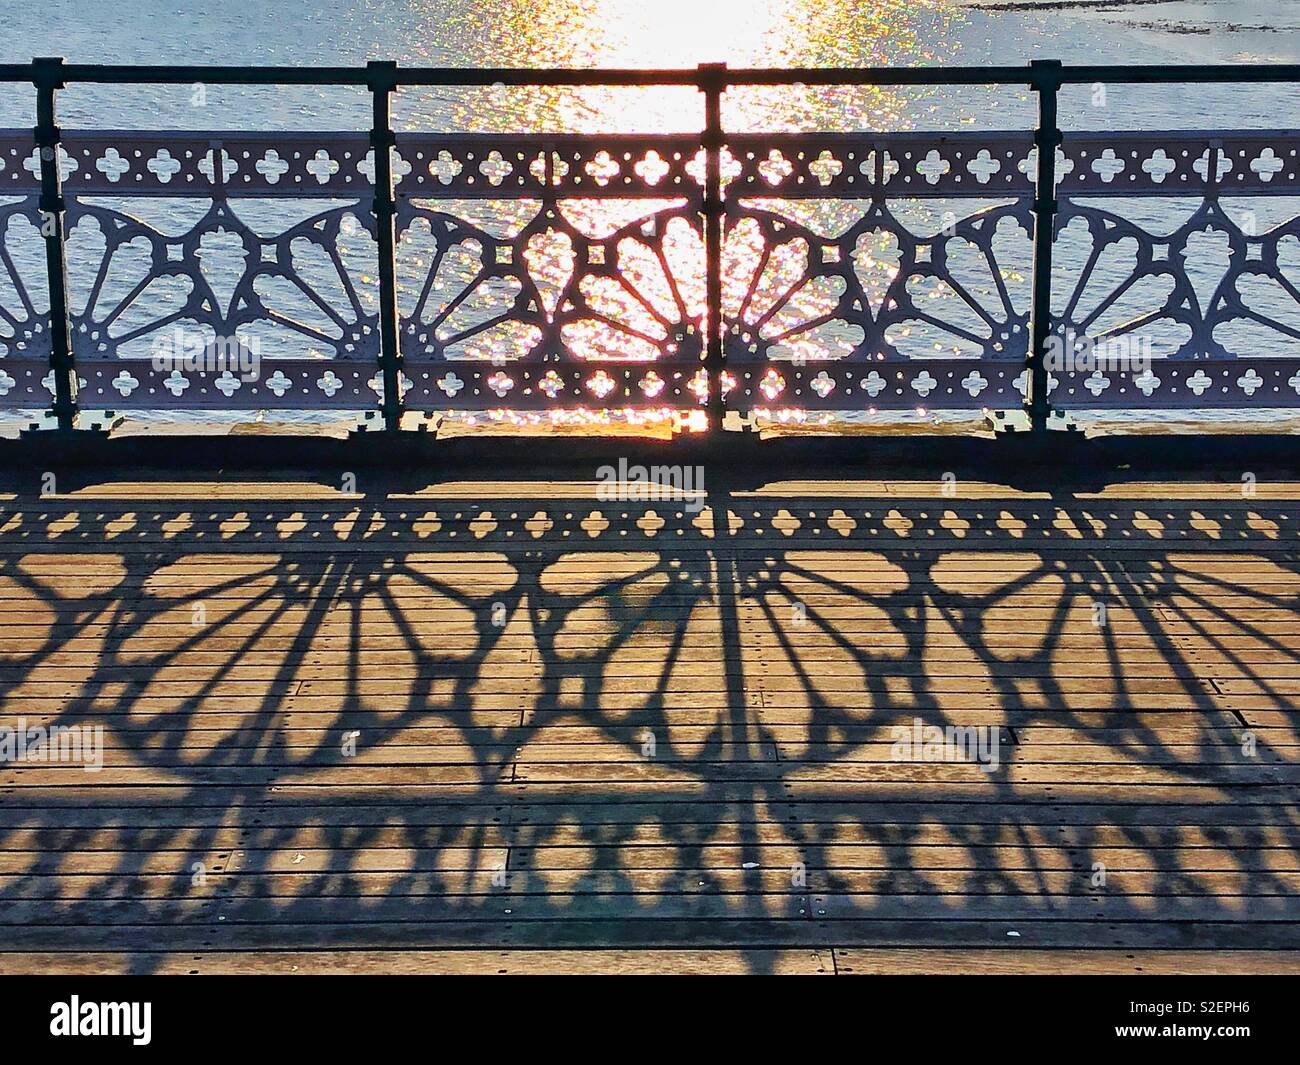 Shadows of pier railings on Penarth pier, Wales, afternoon, November. Stock Photo